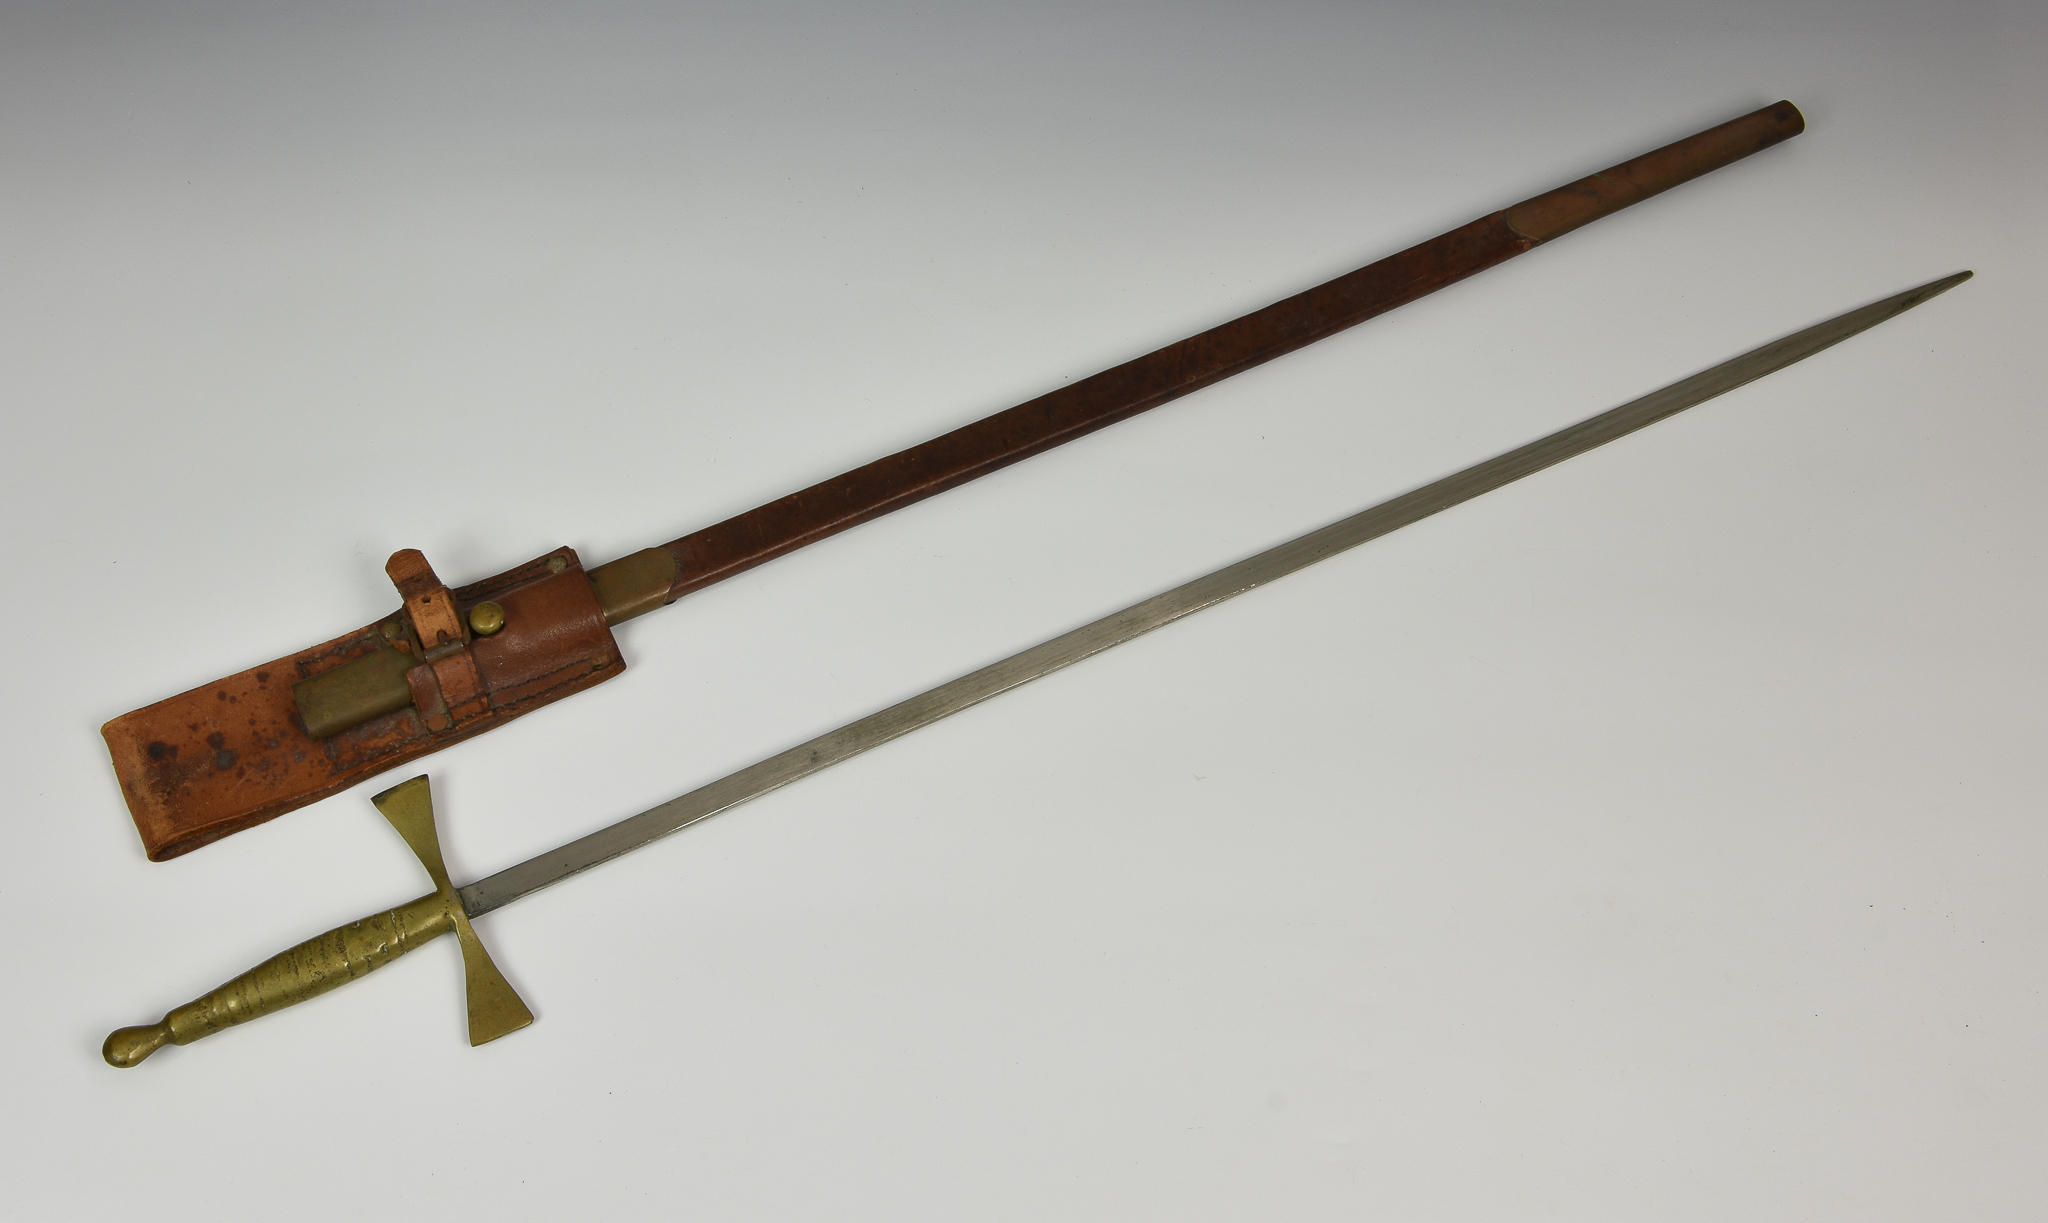 An unmarked Court Sword, brass handle, 27in. blade, brown leather scabbard. - Image 2 of 3